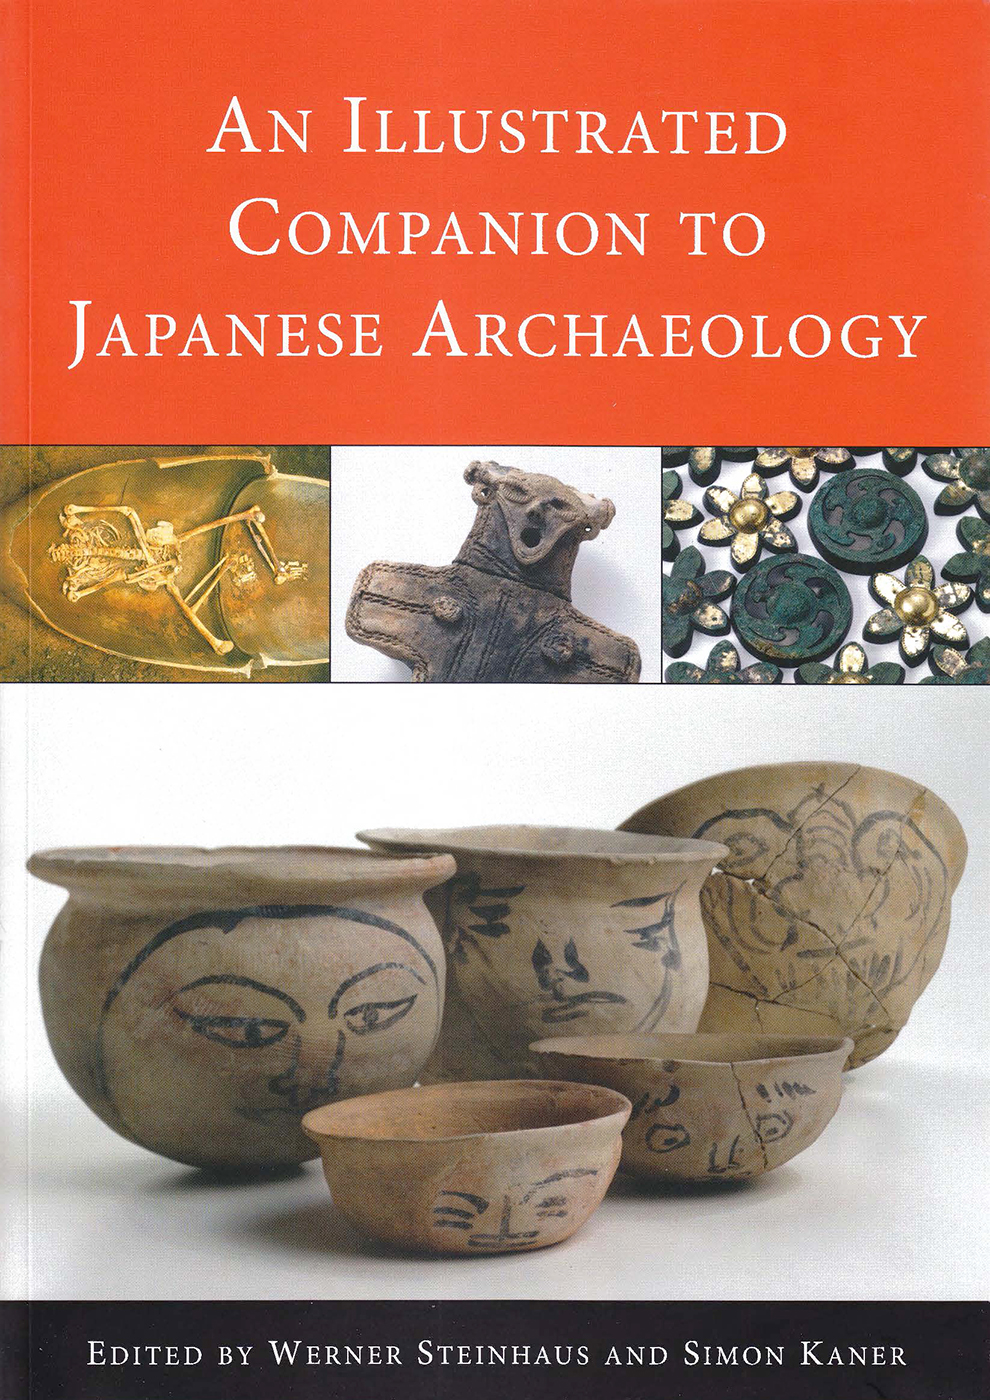 An Illustrated Companion to Japanese Archaeology, 2016, 344 p.